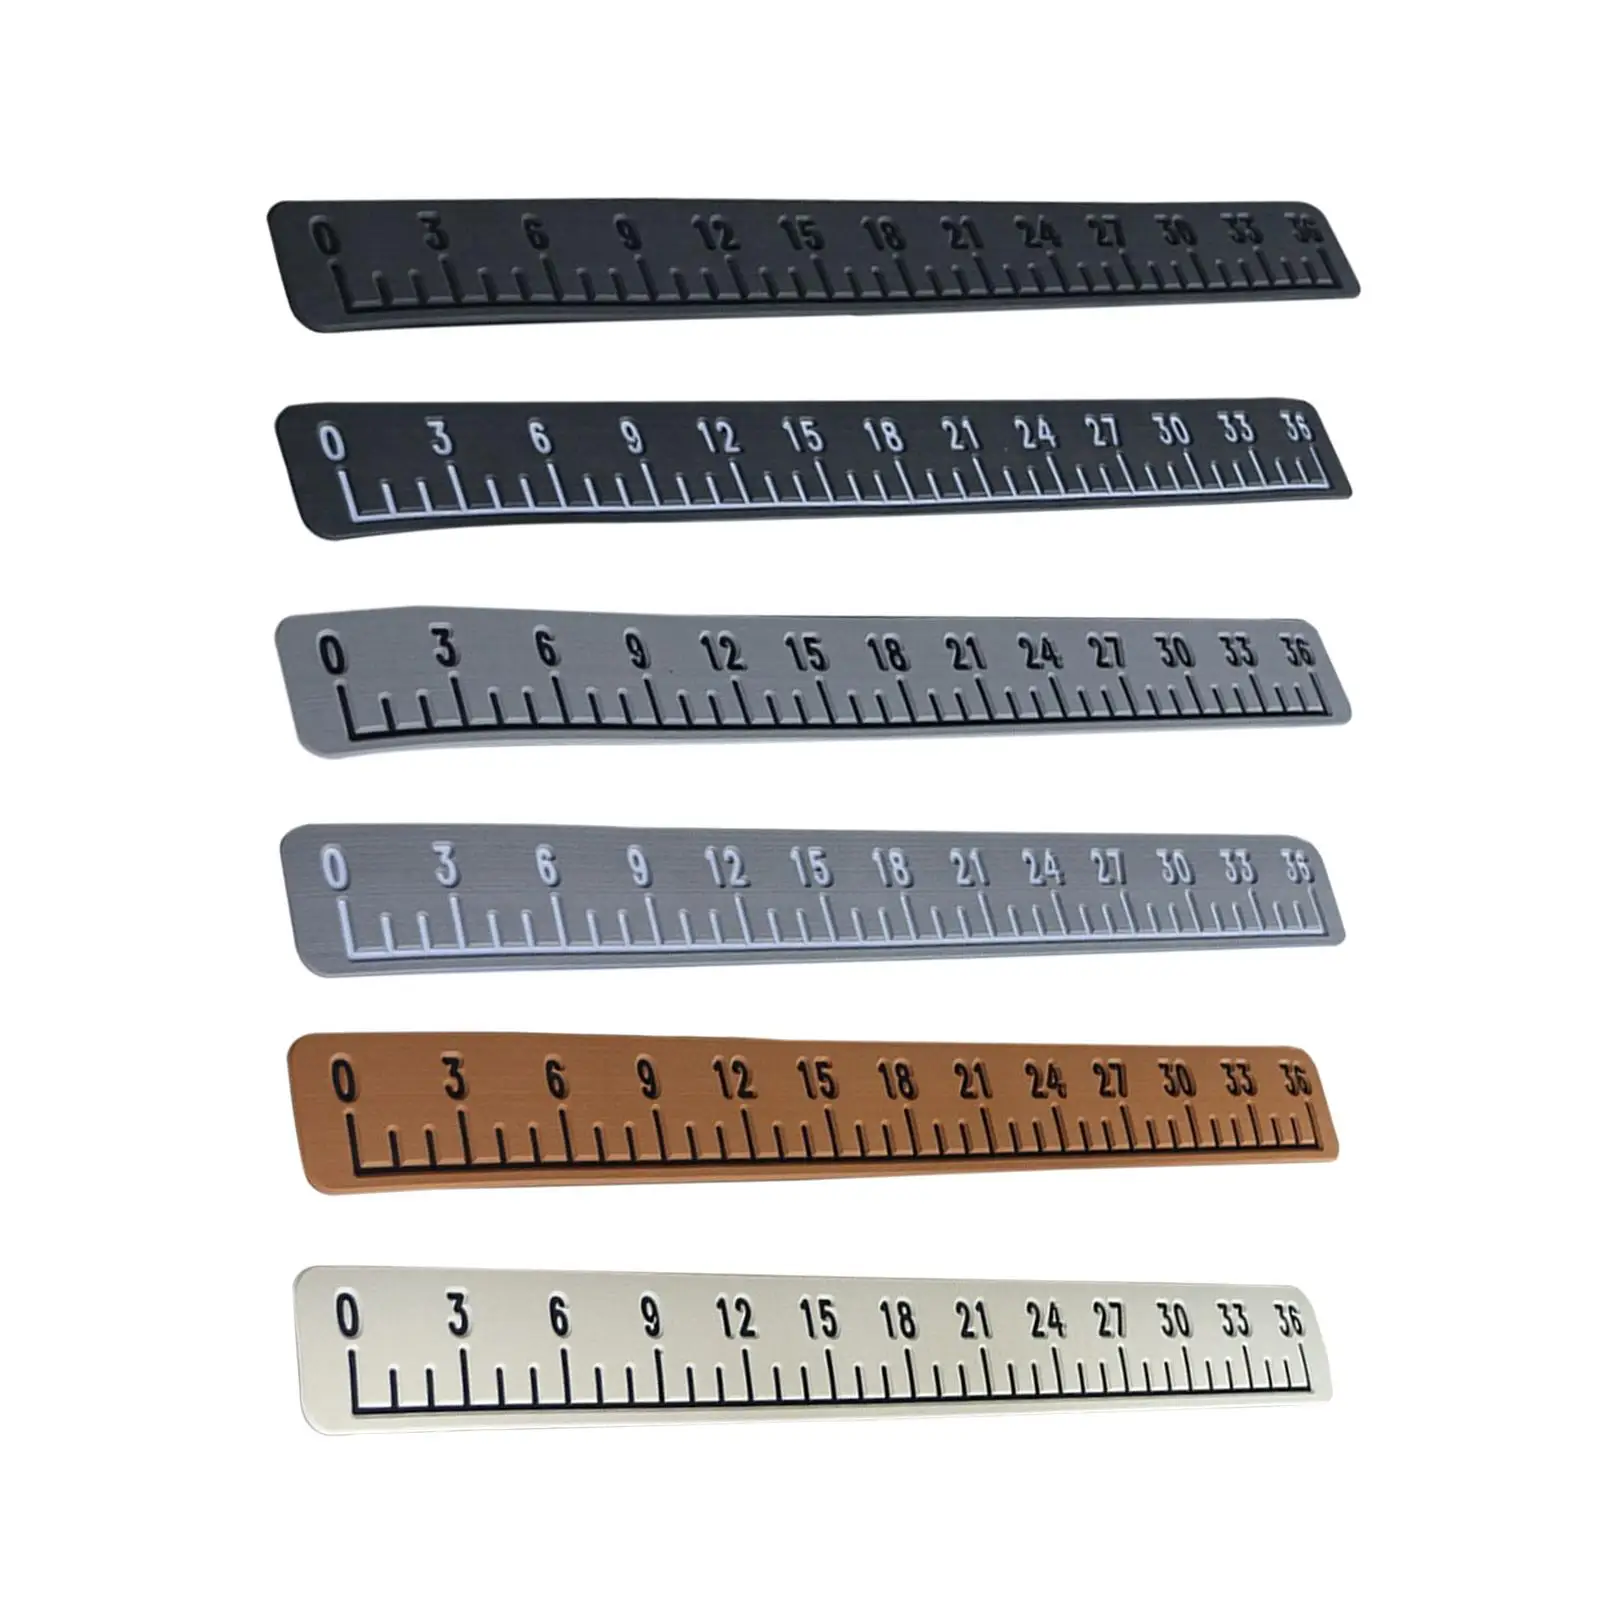 

Fish Ruler Easy to Install 39 inch Foam Strong Adhesive Backing Measurement Sticker Tool Fish Measuring Ruler for Fishing Kayaks